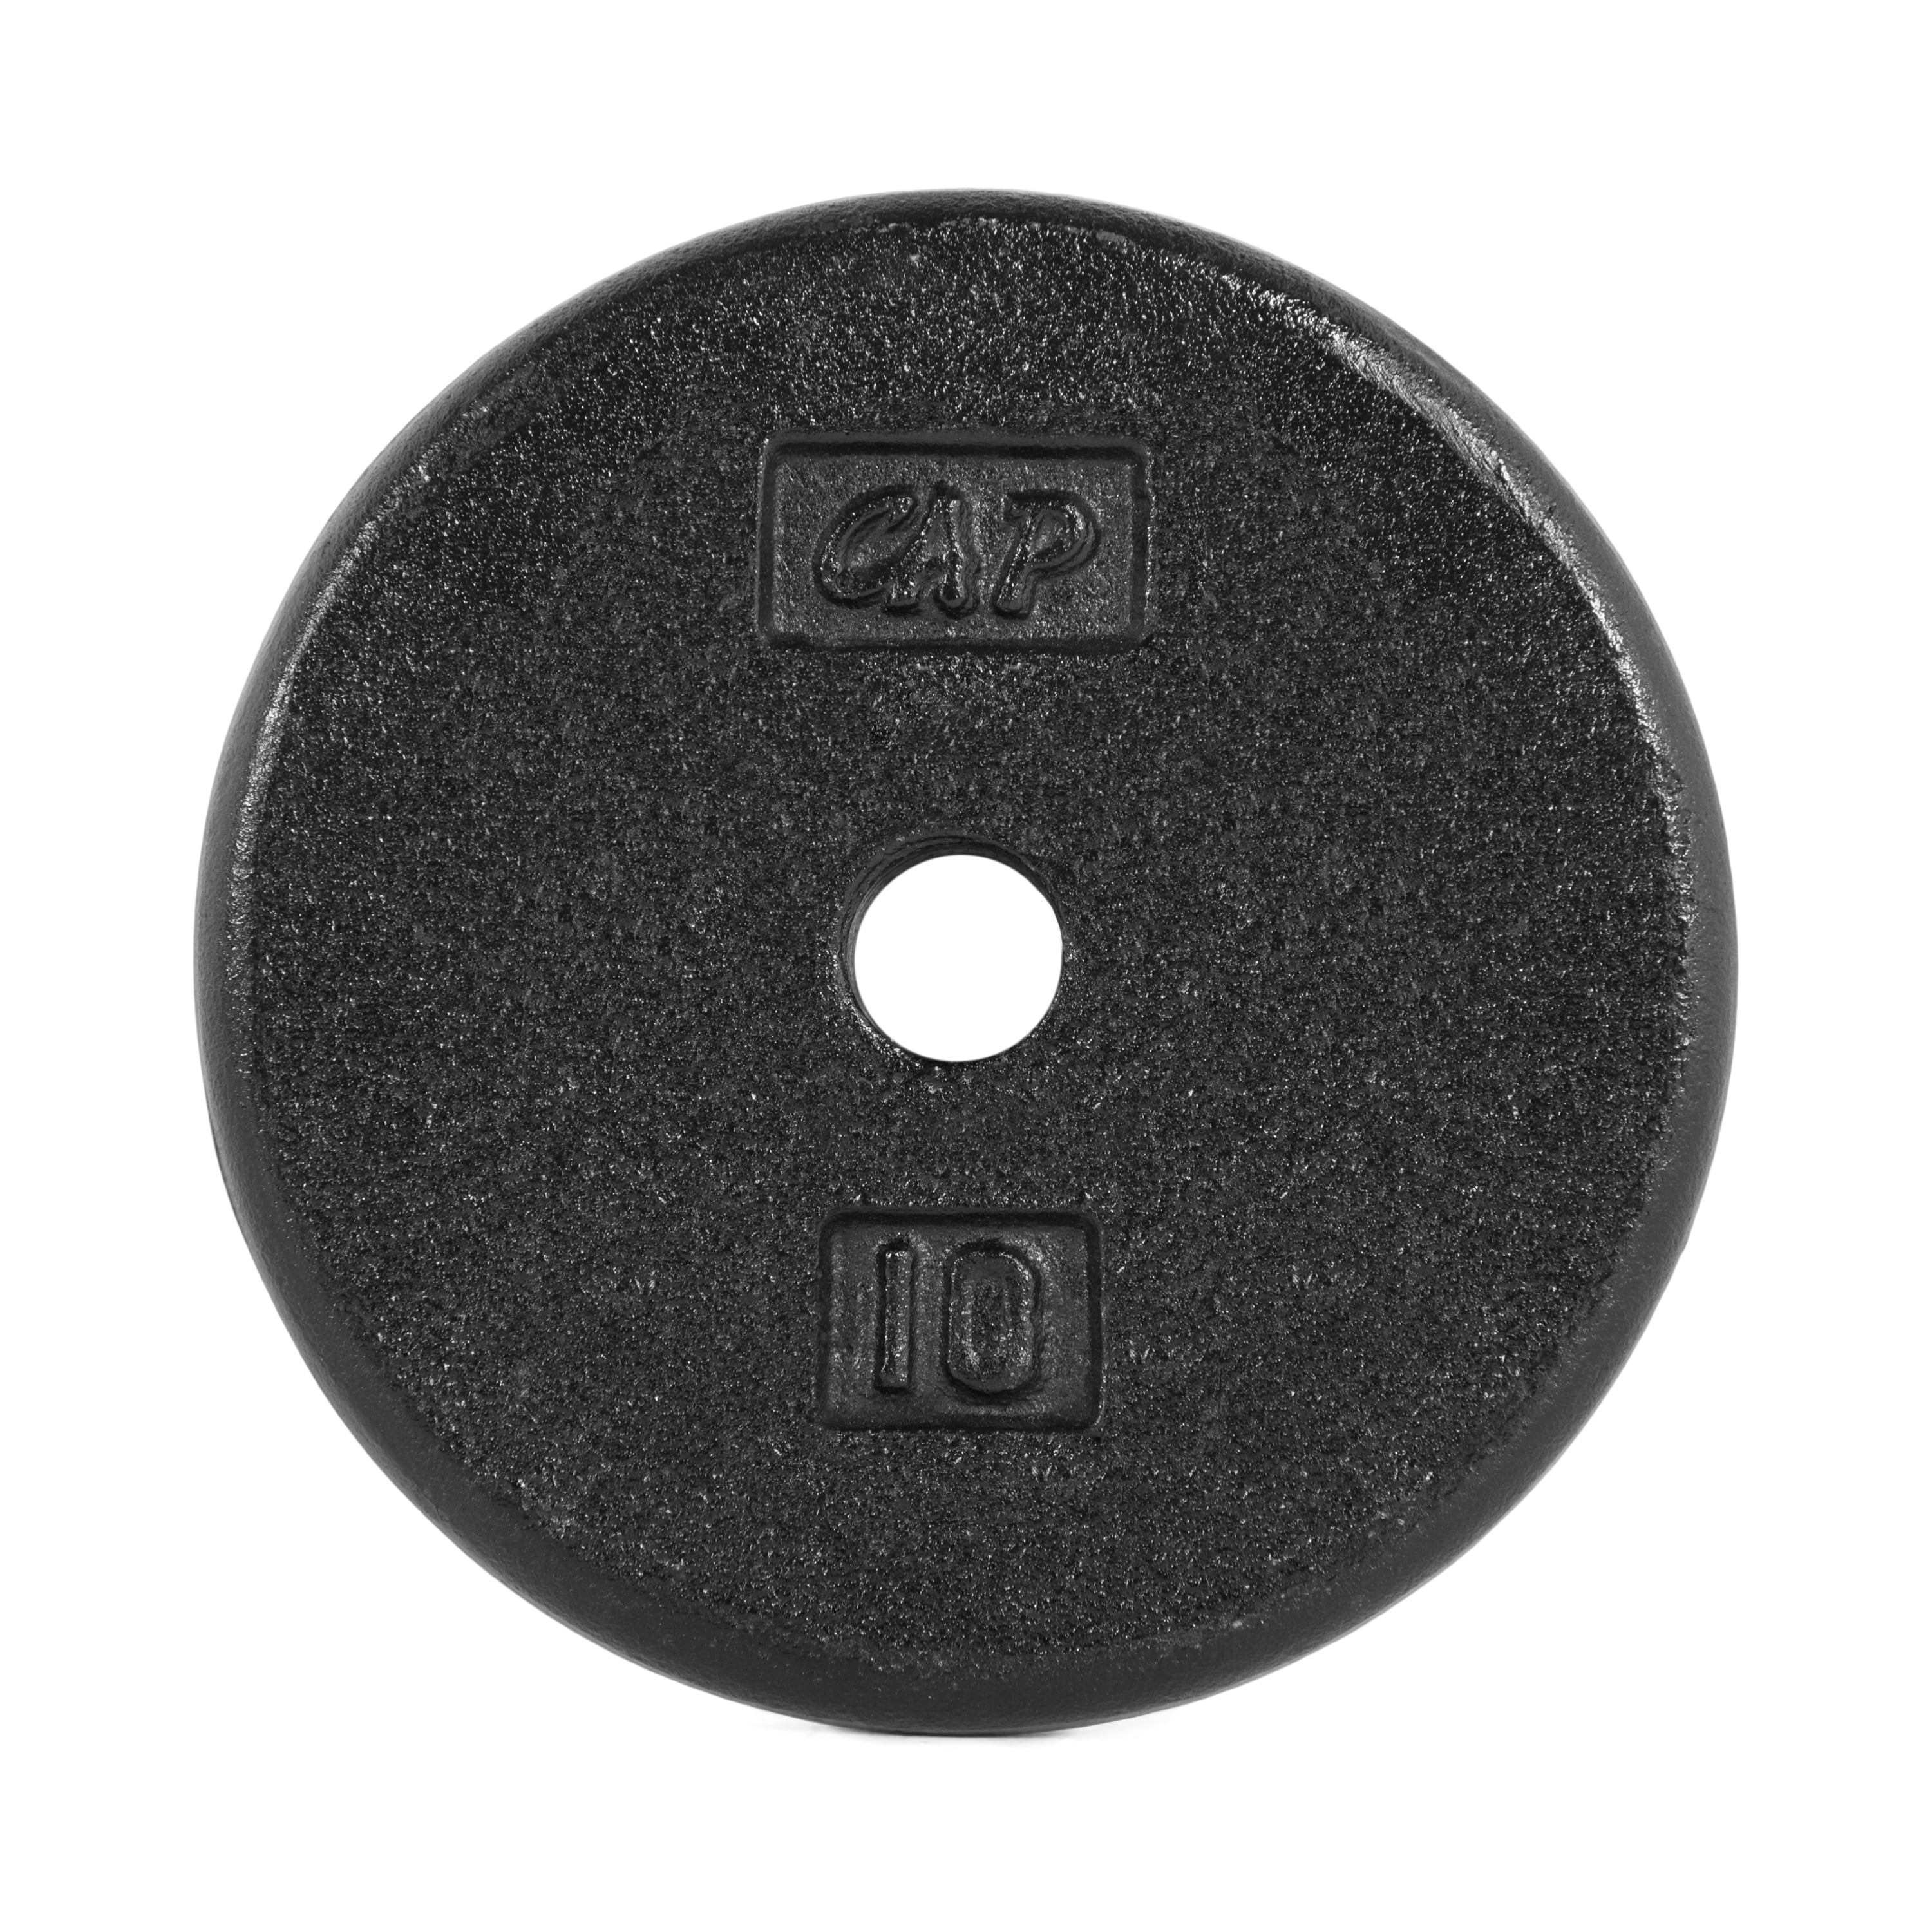 total 20 LB 10 lb CAP Standard 1” Weight Plates FREE PRIORITY SHIPPING Qty 2 